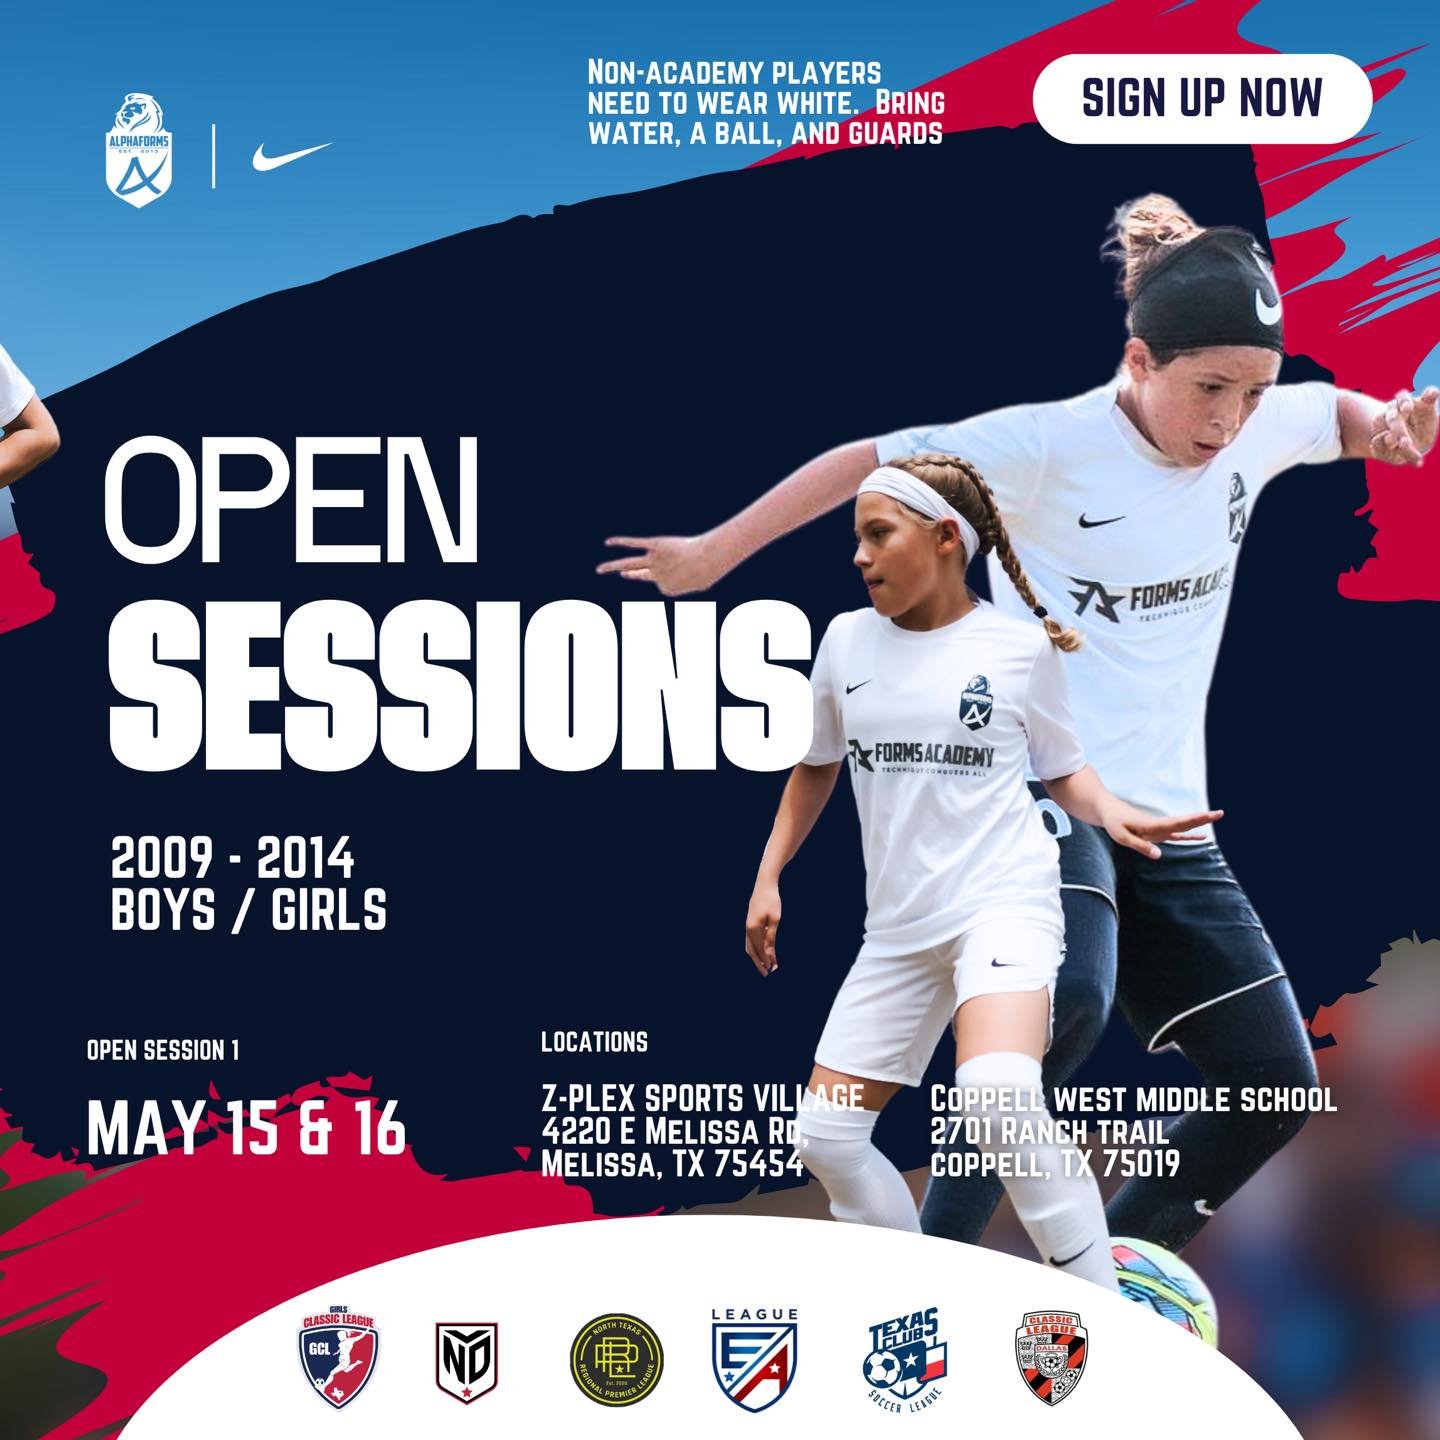 Registration is now open for our Open Sessions, designed for boys and girls born between 2006 and 2014. These sessions offer a unique chance for young players to experience our high-quality training and vibrant team atmosphere firsthand.

#opensessio